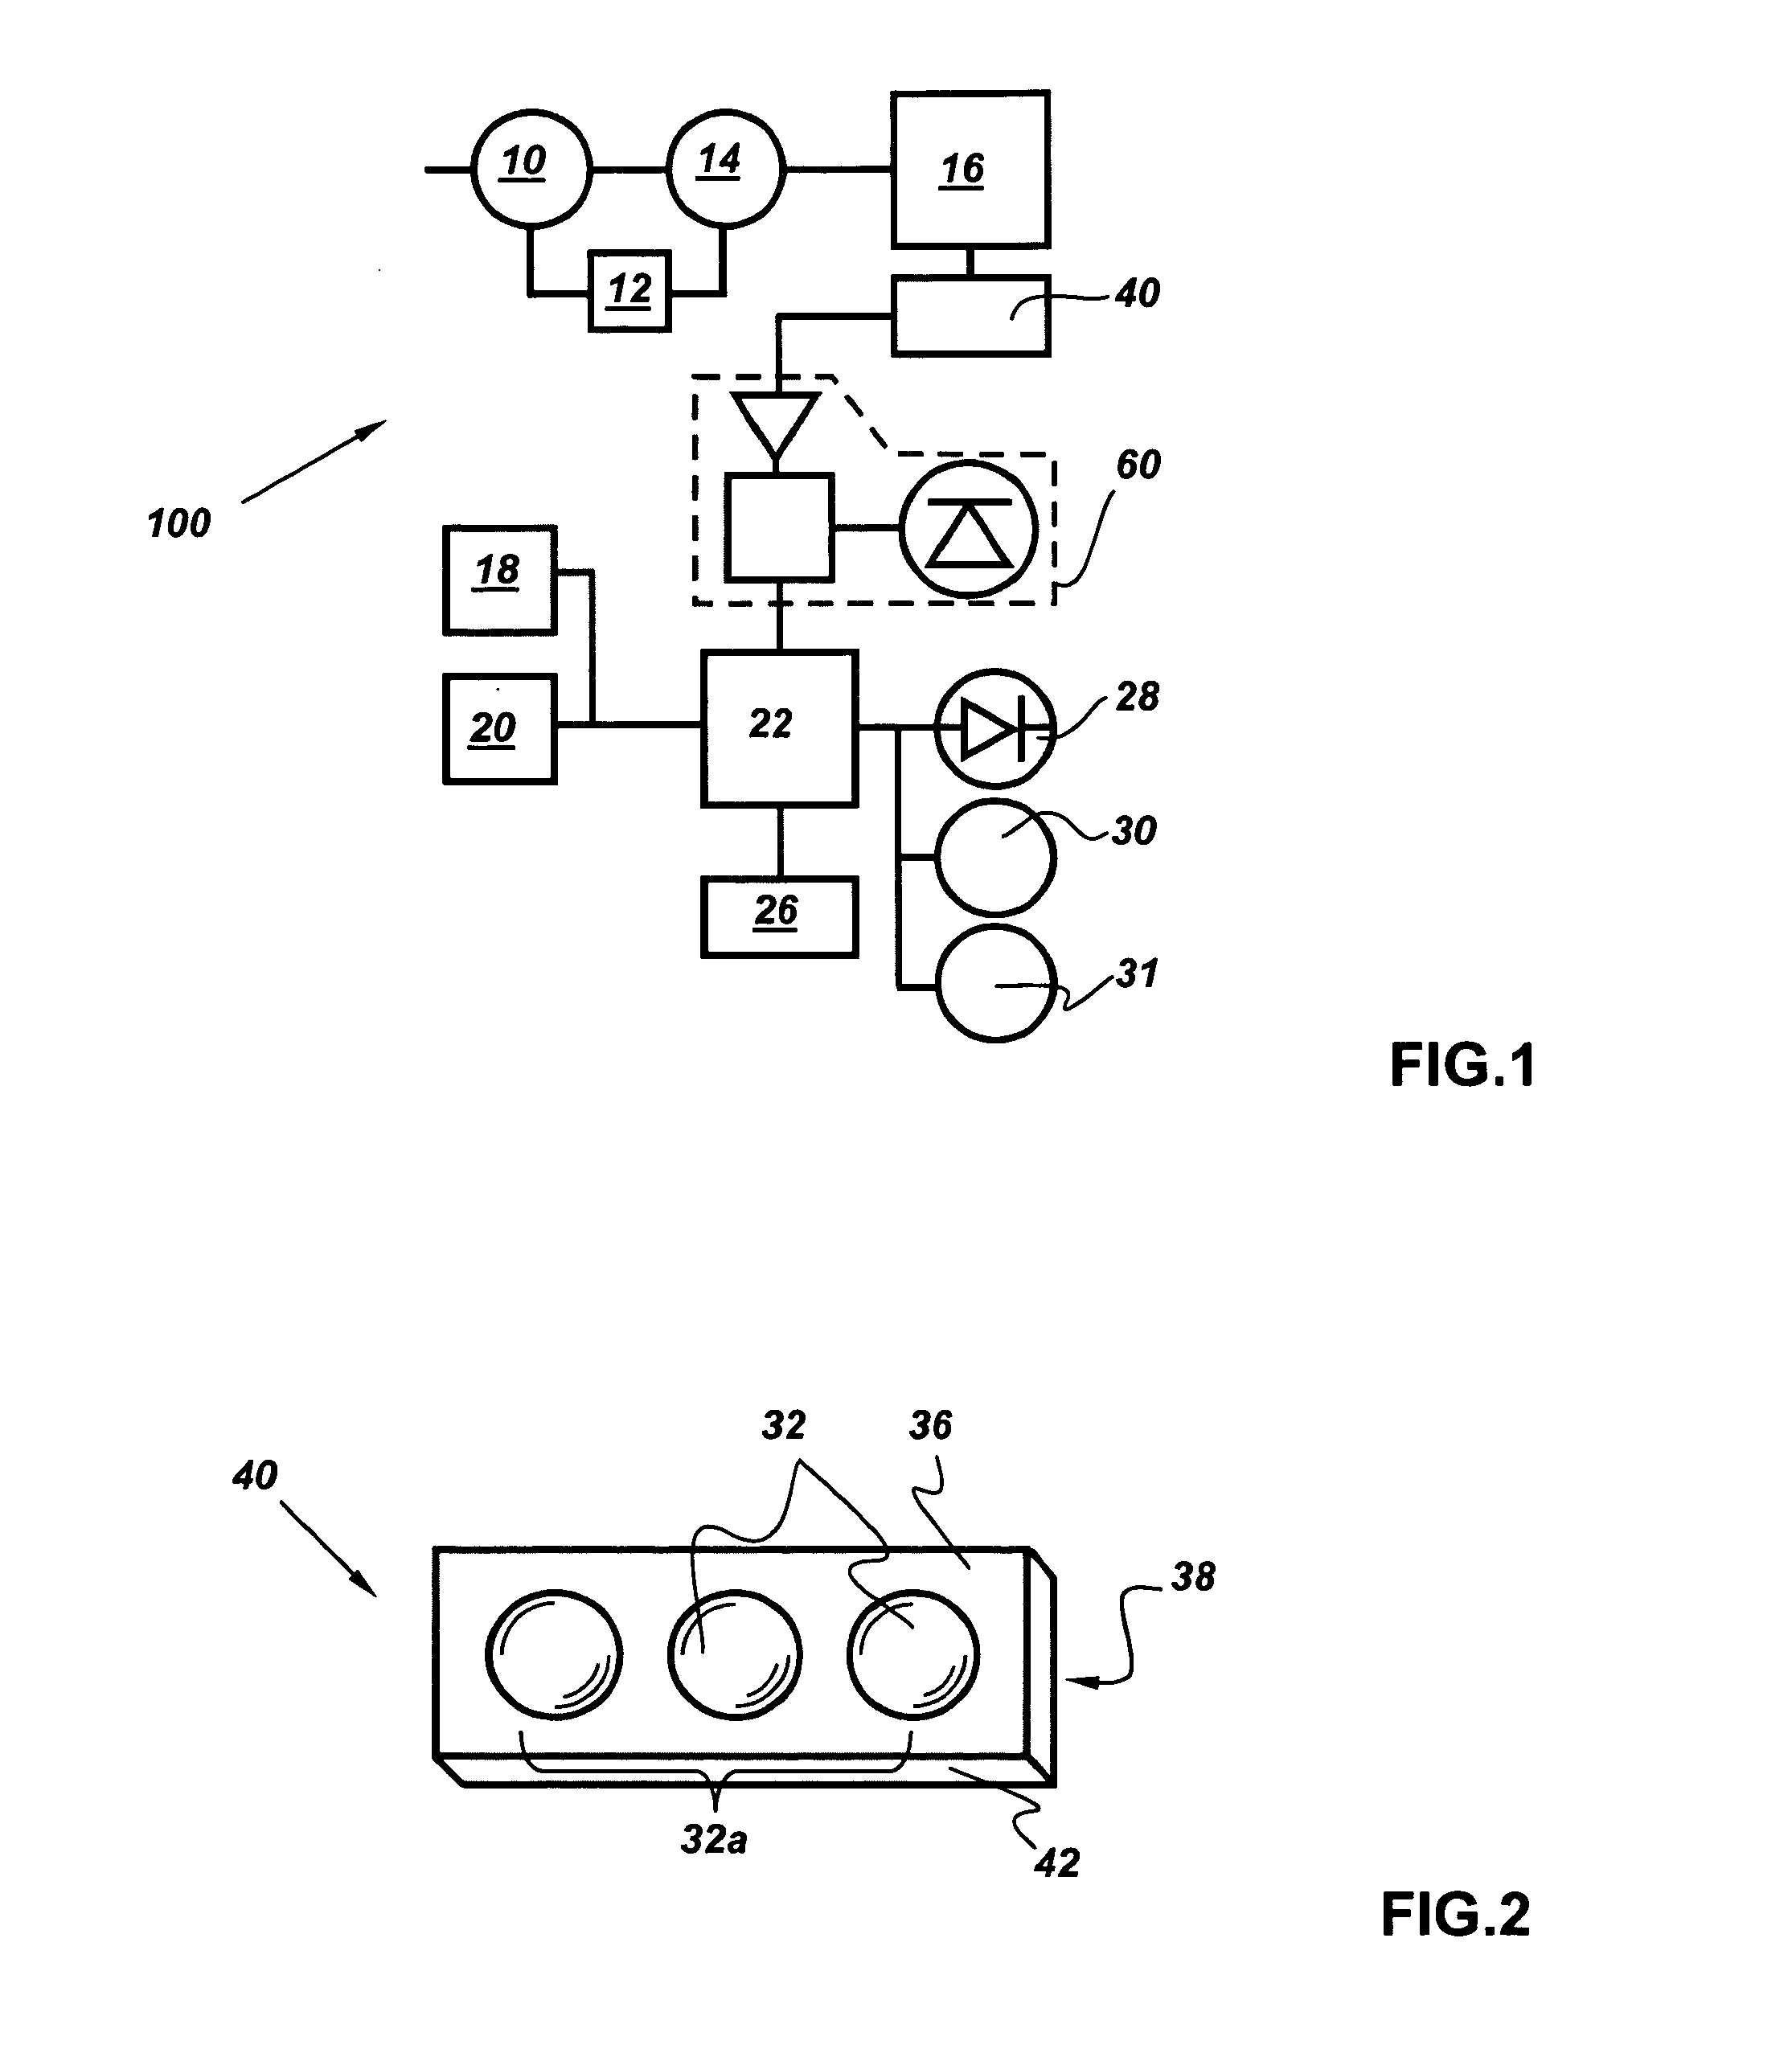 Apparatus, system, and method of detecting an analyte utilizing pyroelectric technology